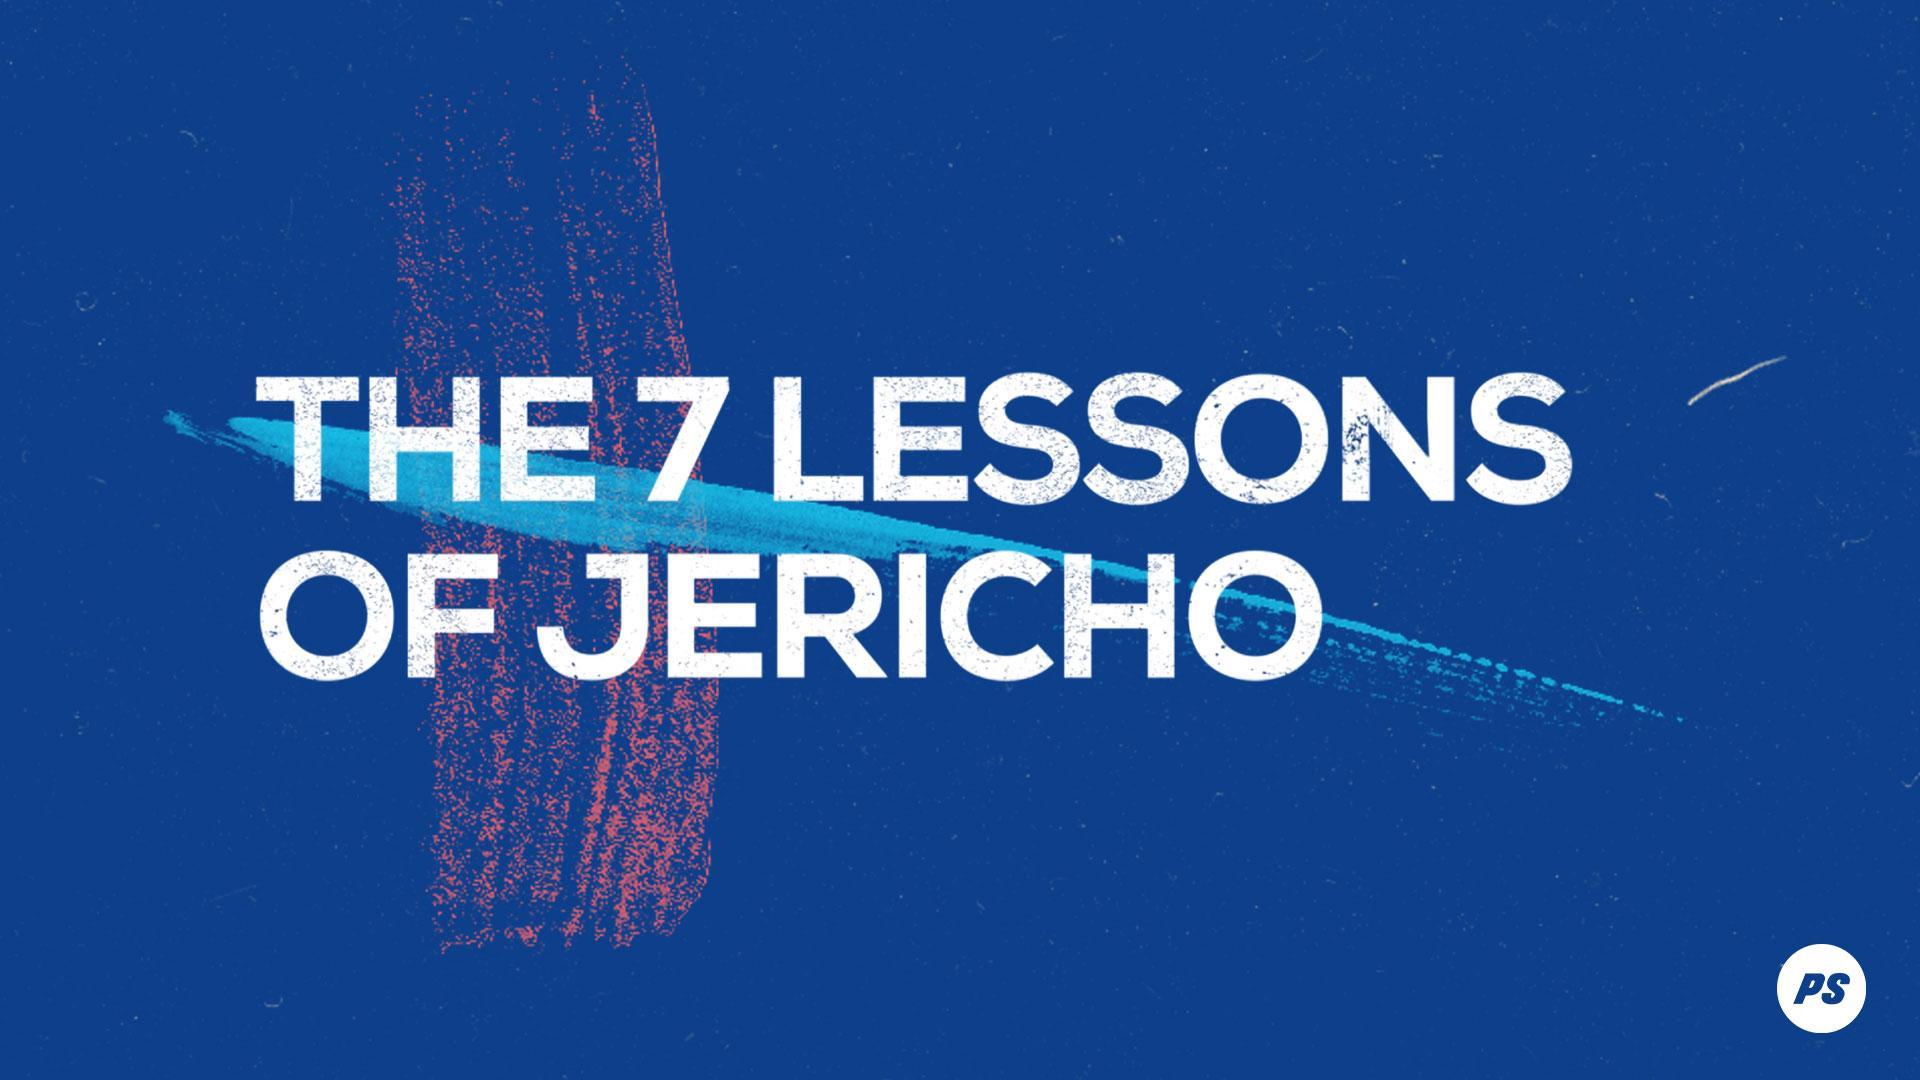 Featured Image for “The 7 Lessons of Jericho”